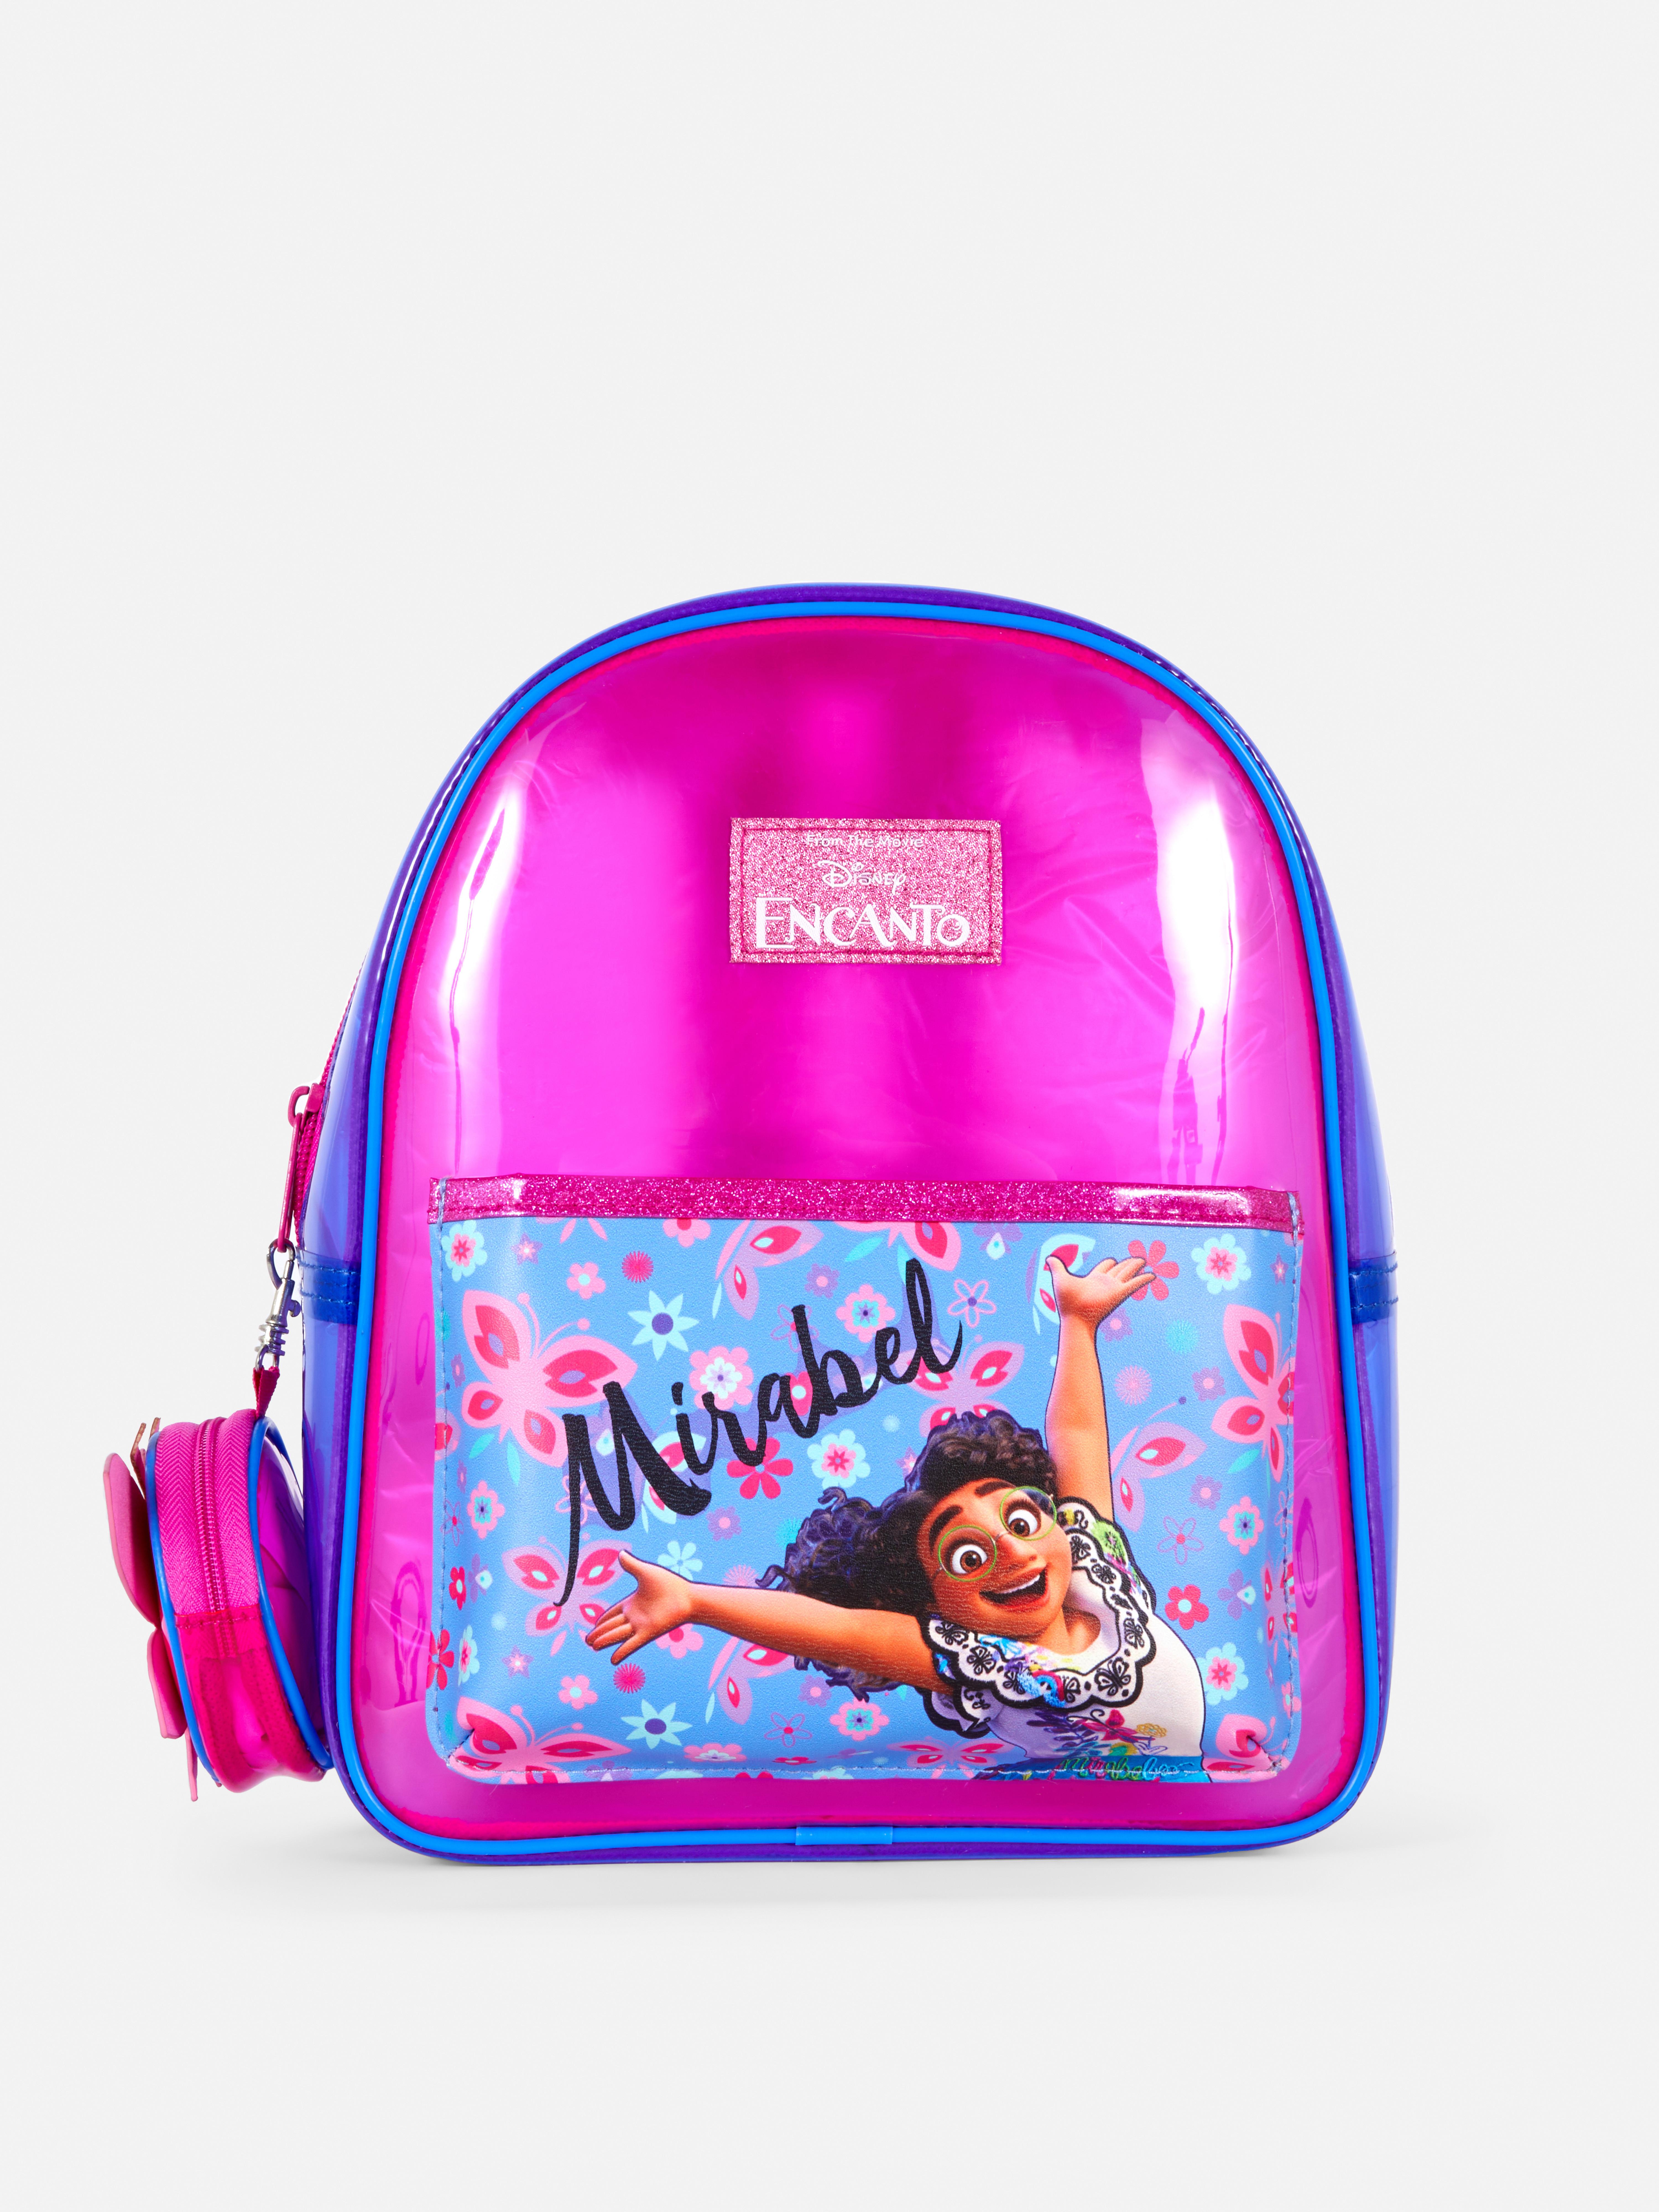 Disney's Encanto Printed Pouch Backpack